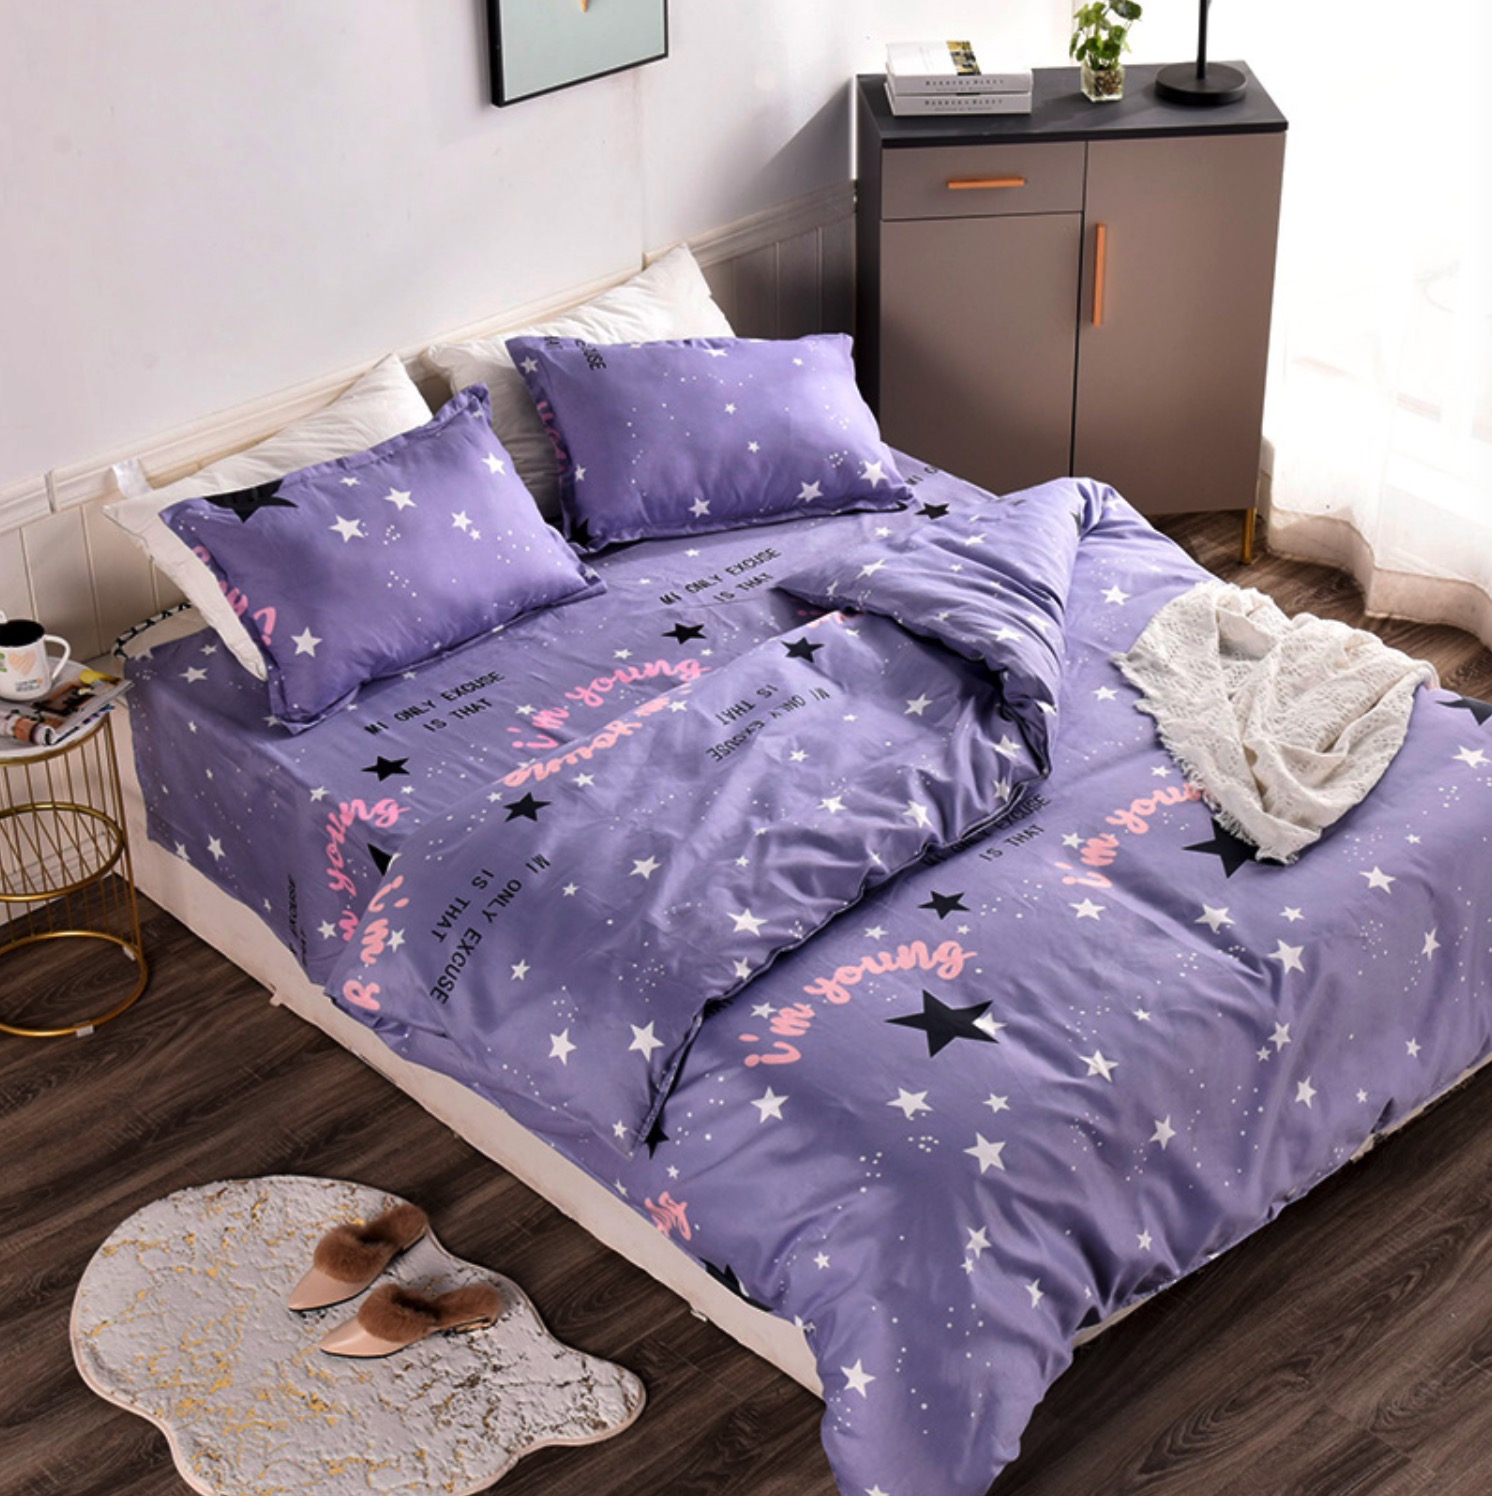 The best furniture photography is in China. Purple bed